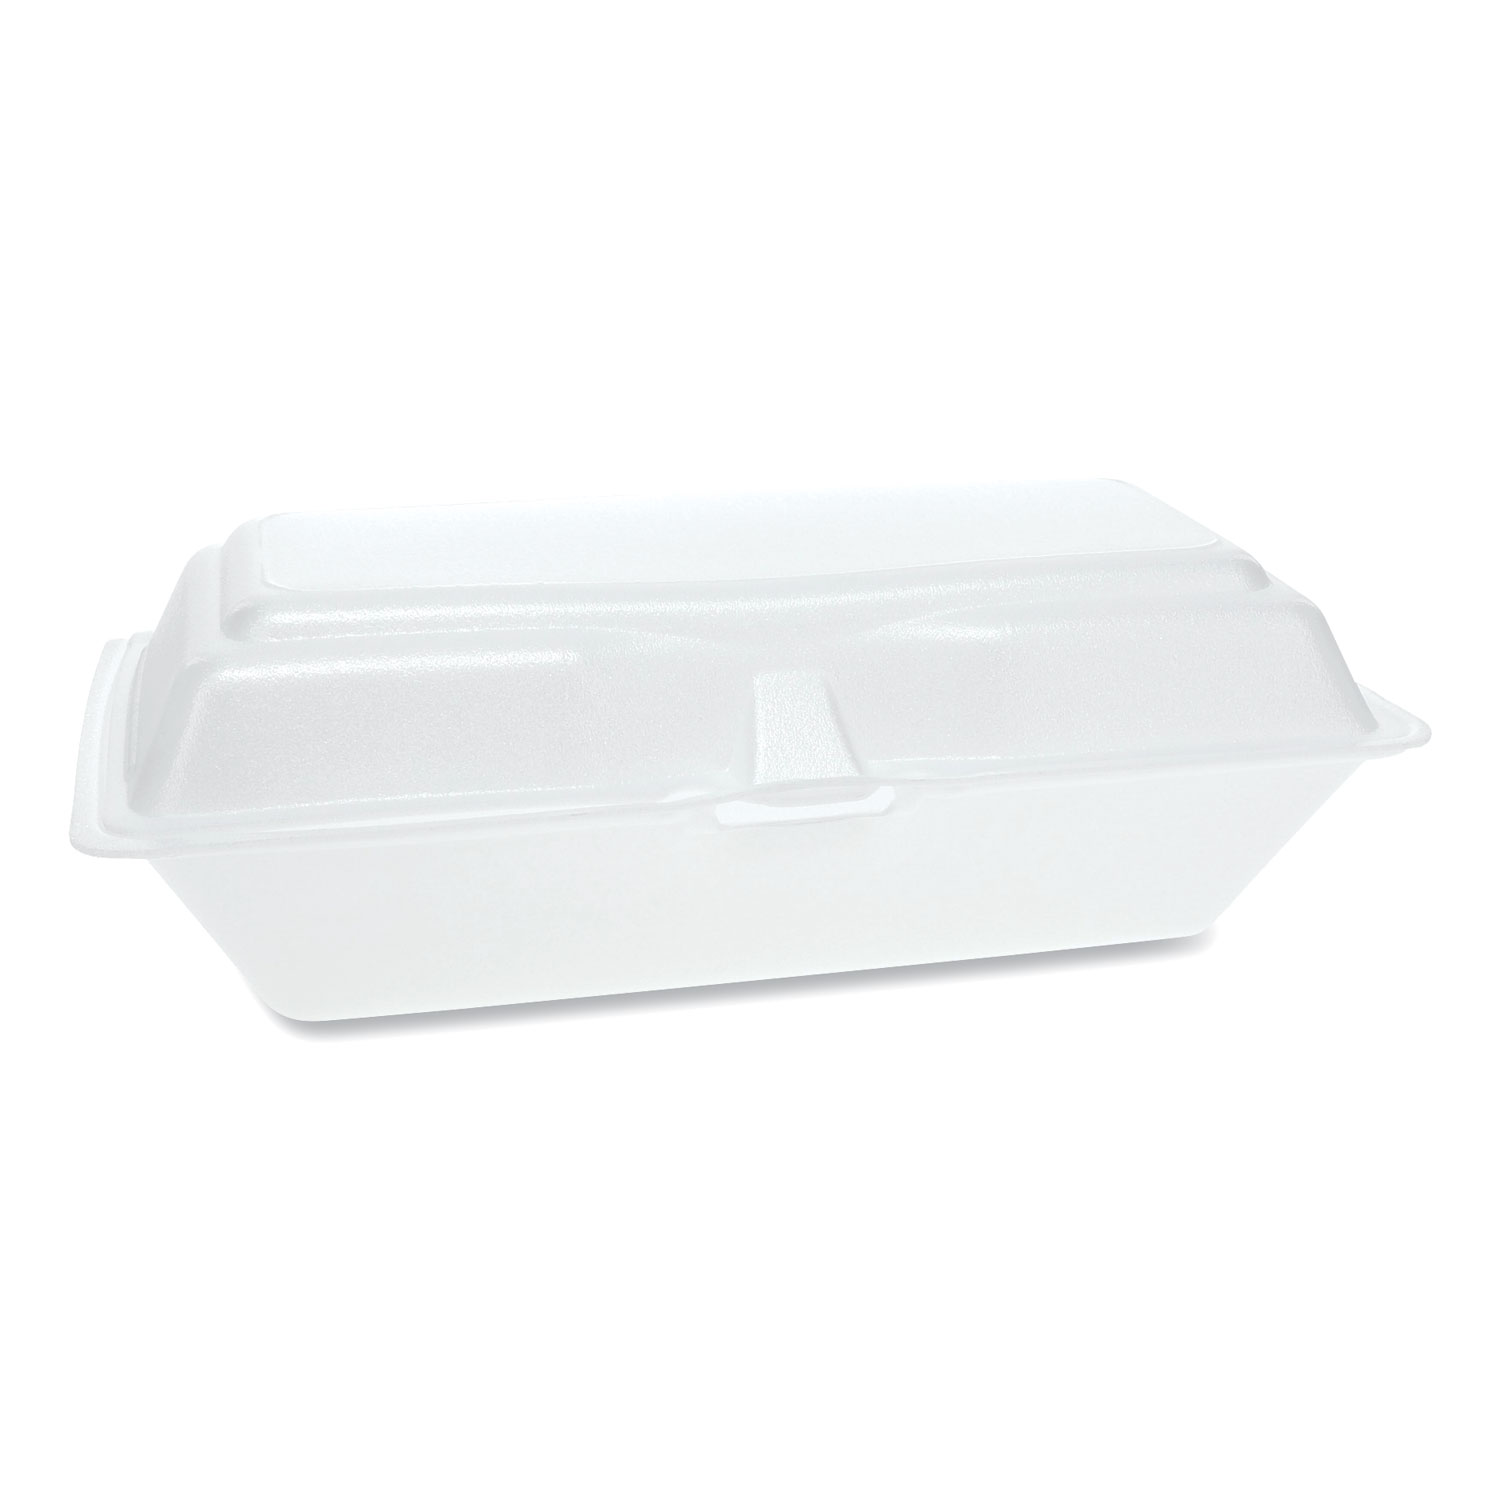  Pactiv 0TH10099Y000 Foam Hinged Lid Containers, Single Tab Lock Hoagie, 9.75 x 5 x 3.25, 1-Compartment, White, 560/Carton (PCT0TH10099Y000) 